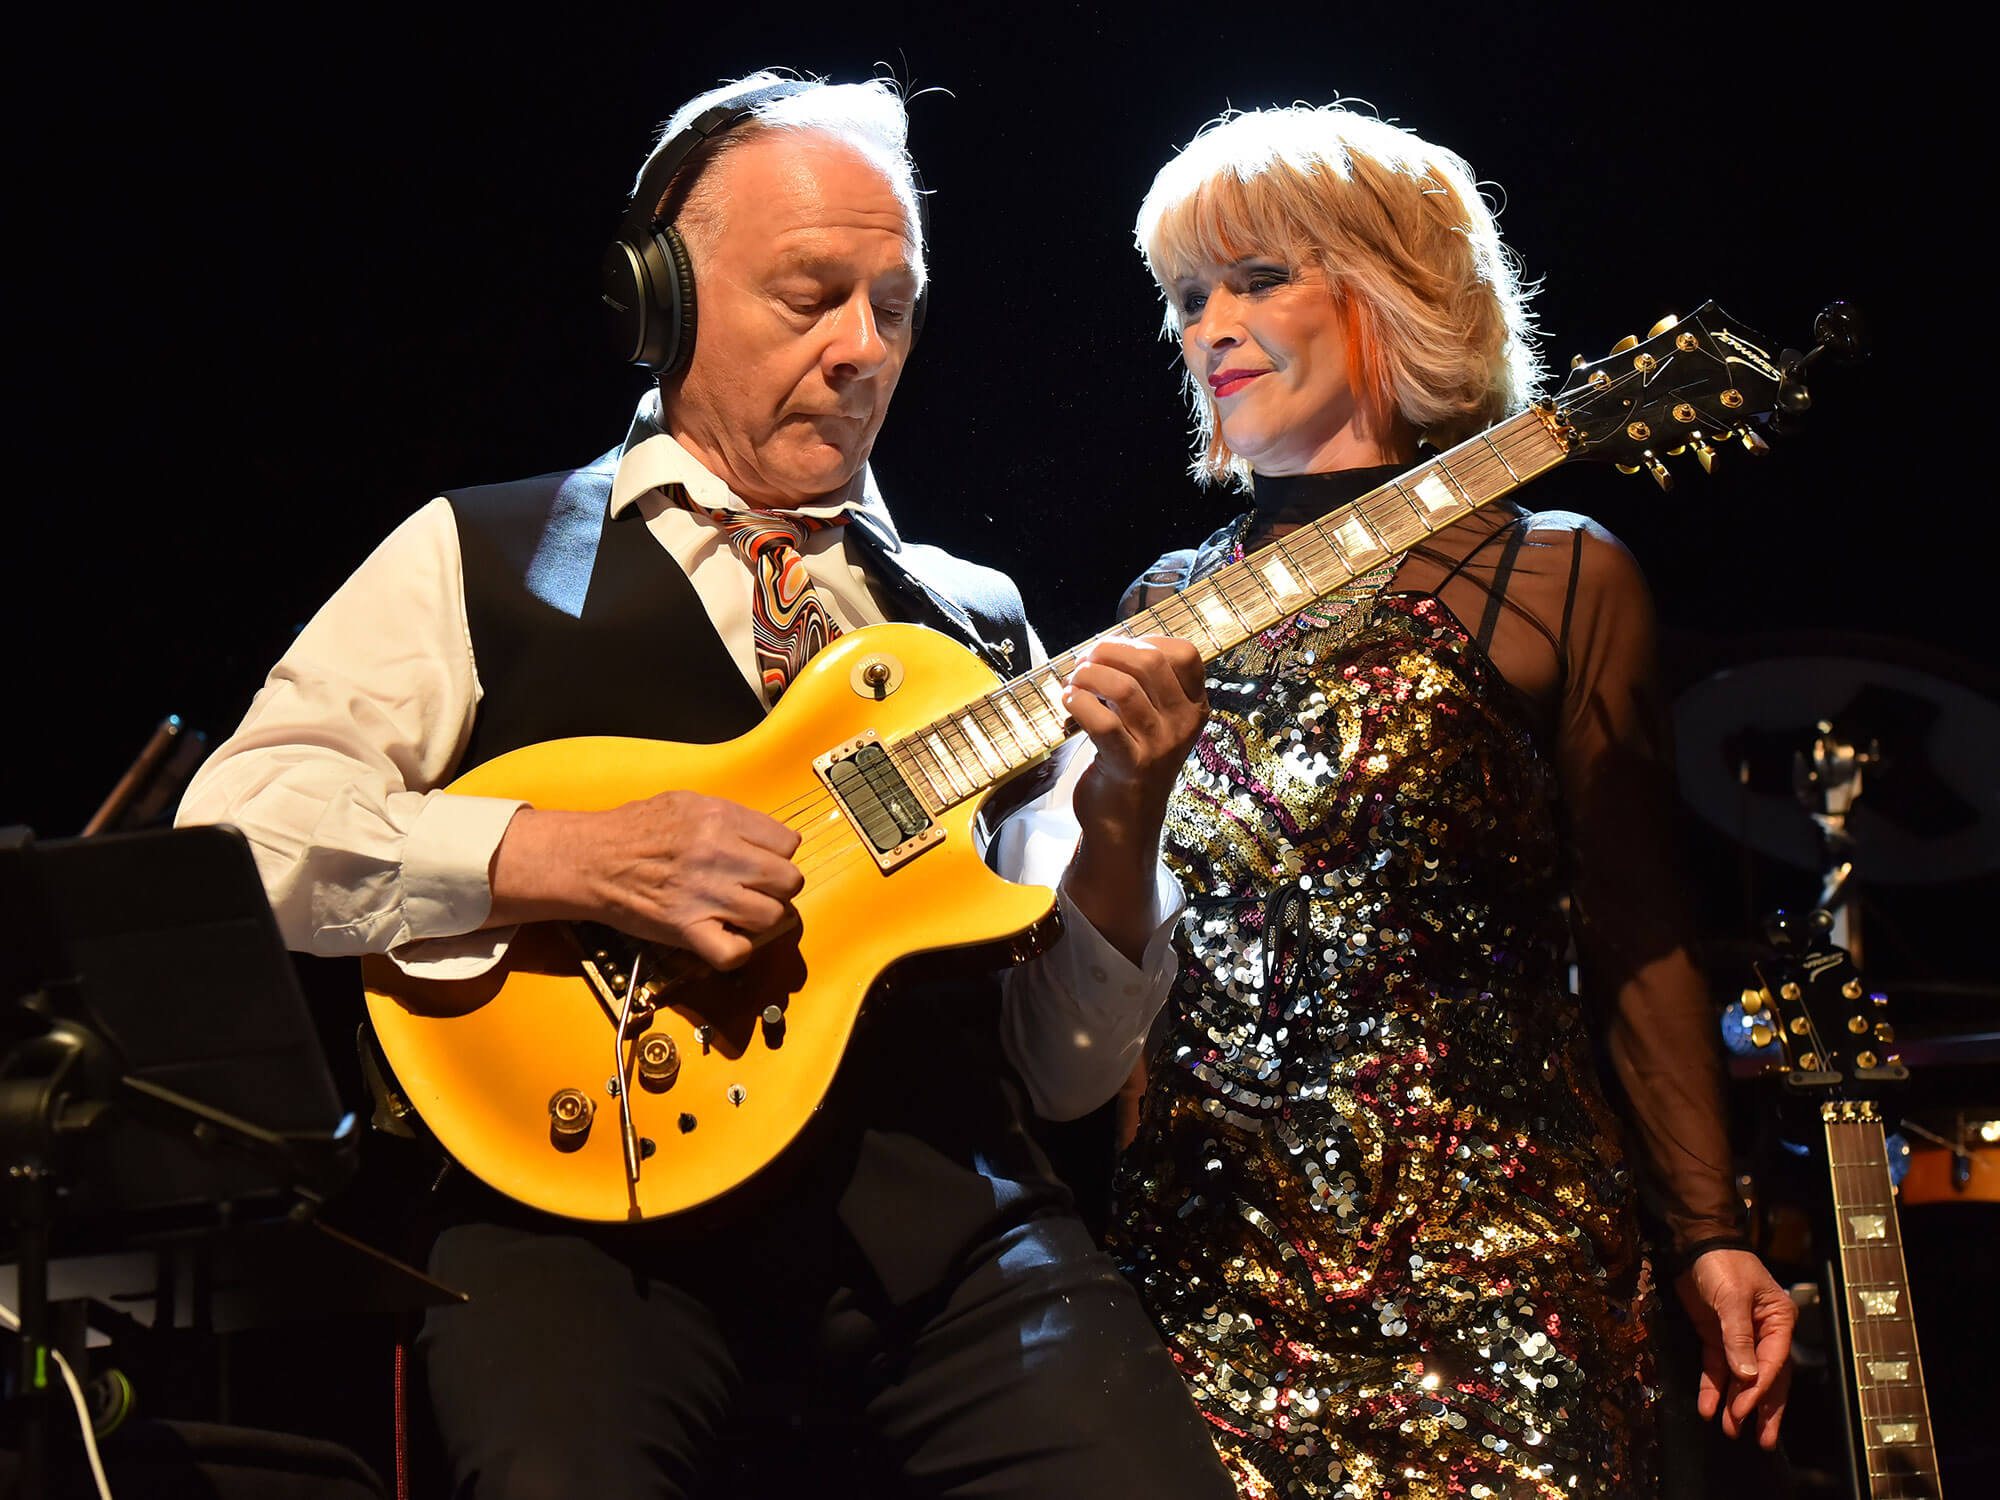 [L-R] Robert Fripp and Toyah Willcox performing live